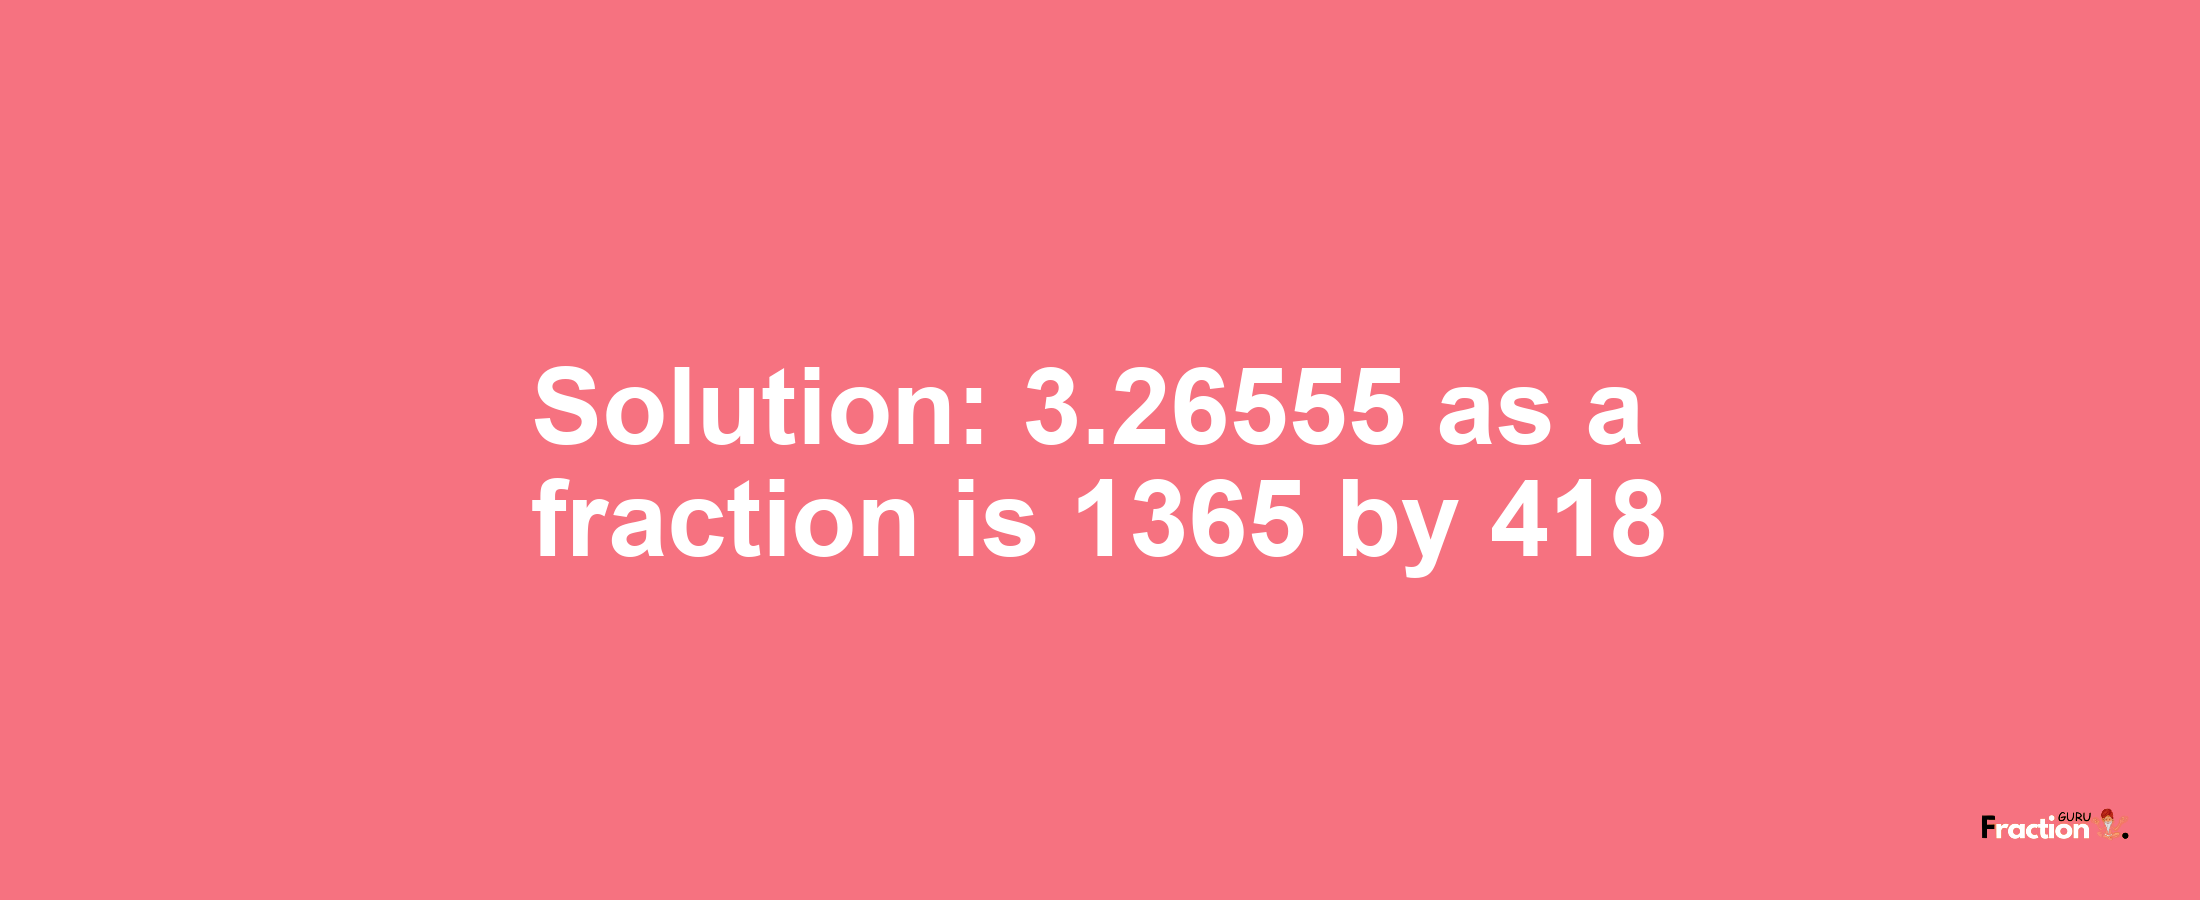 Solution:3.26555 as a fraction is 1365/418